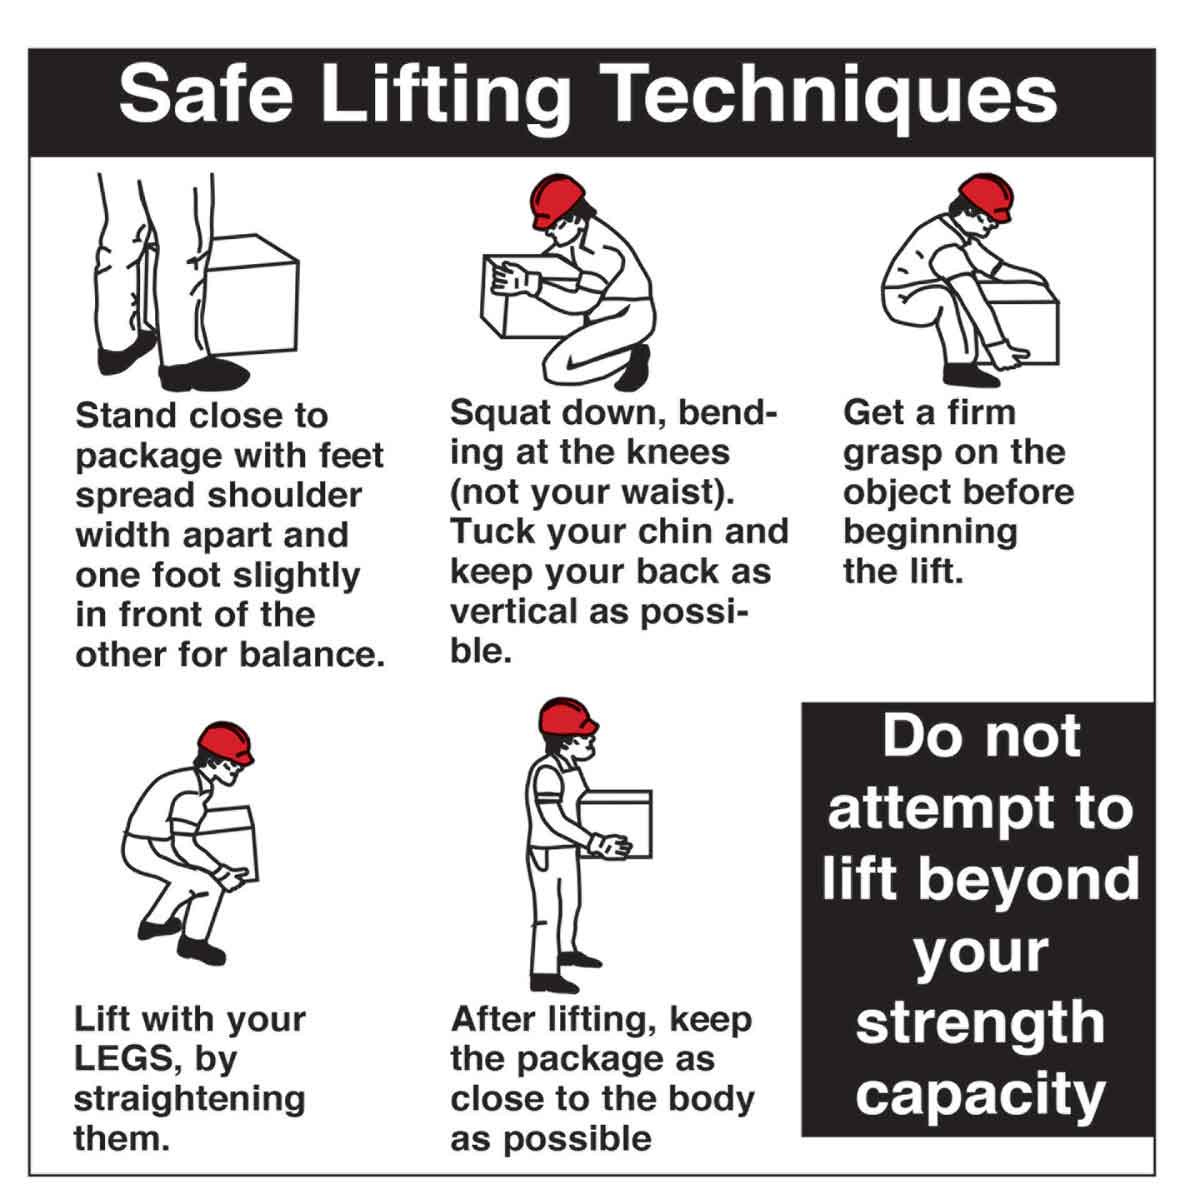 Safe Lifting Safety Tips